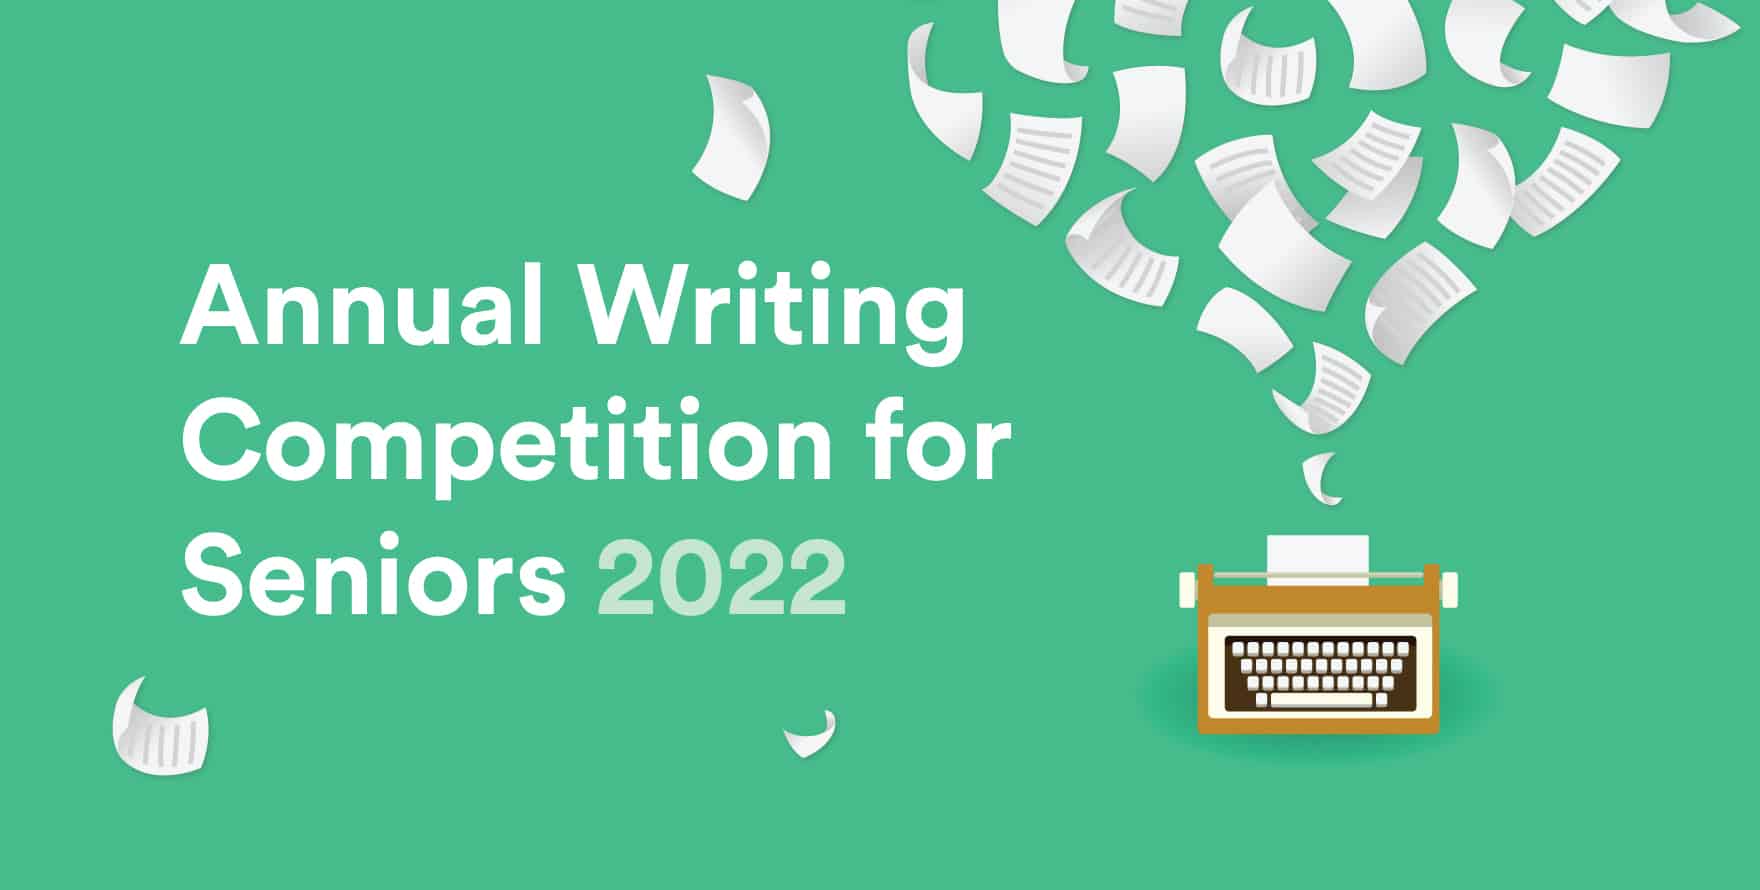 White text on teal background reading "Annual Writing Competition for Seniors 2022," beside an illustration of a typewriter sending pages up into the air